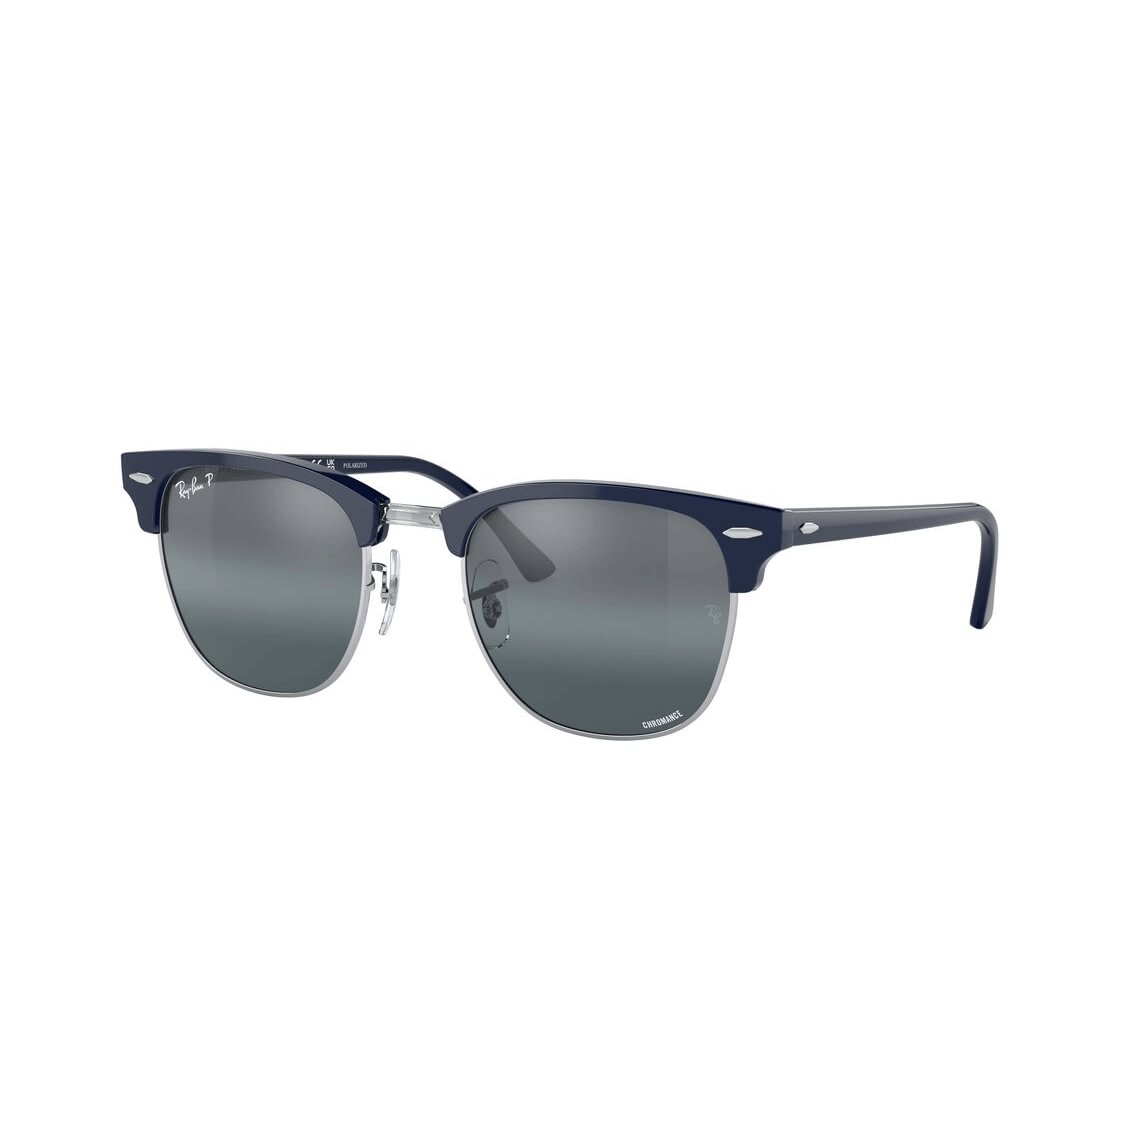 Ray-Ban Clubmaster RB3016 1366G6 5121